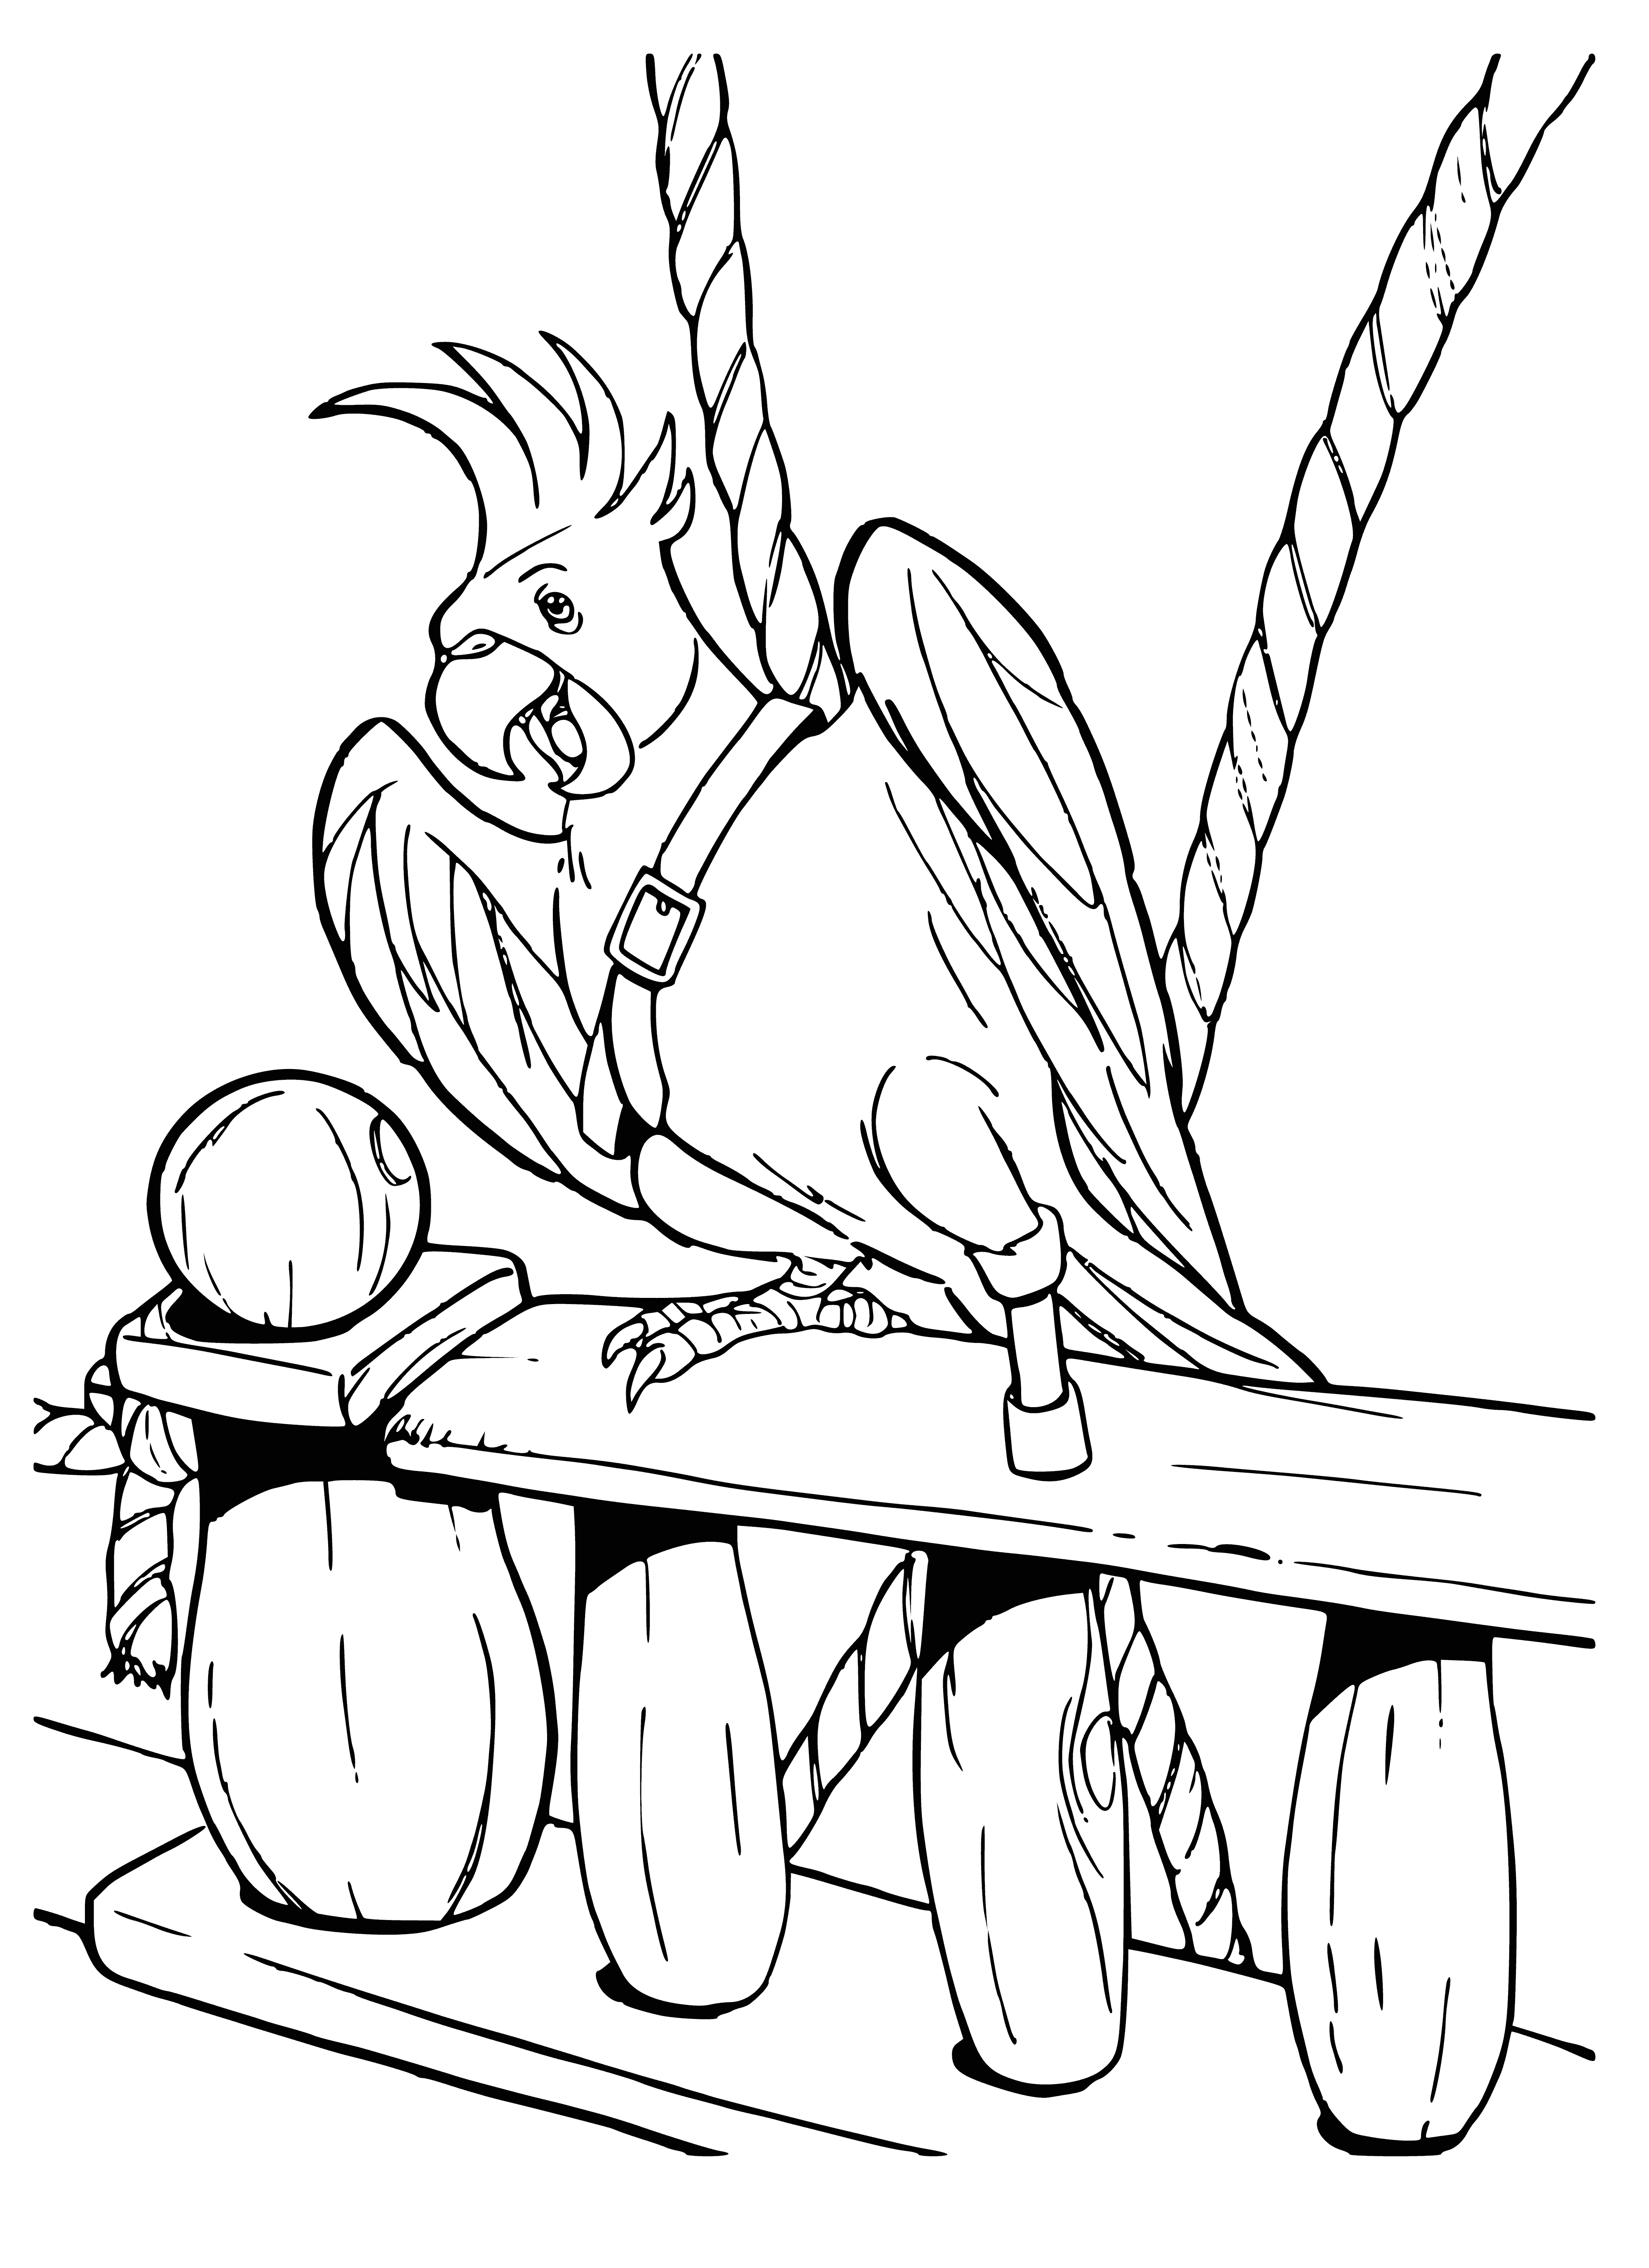 coloring page: Medium green parrot perching on treasure chest filled w/gold coins & jewels. Has brown beak, orange feet & a red/white striped bandana.